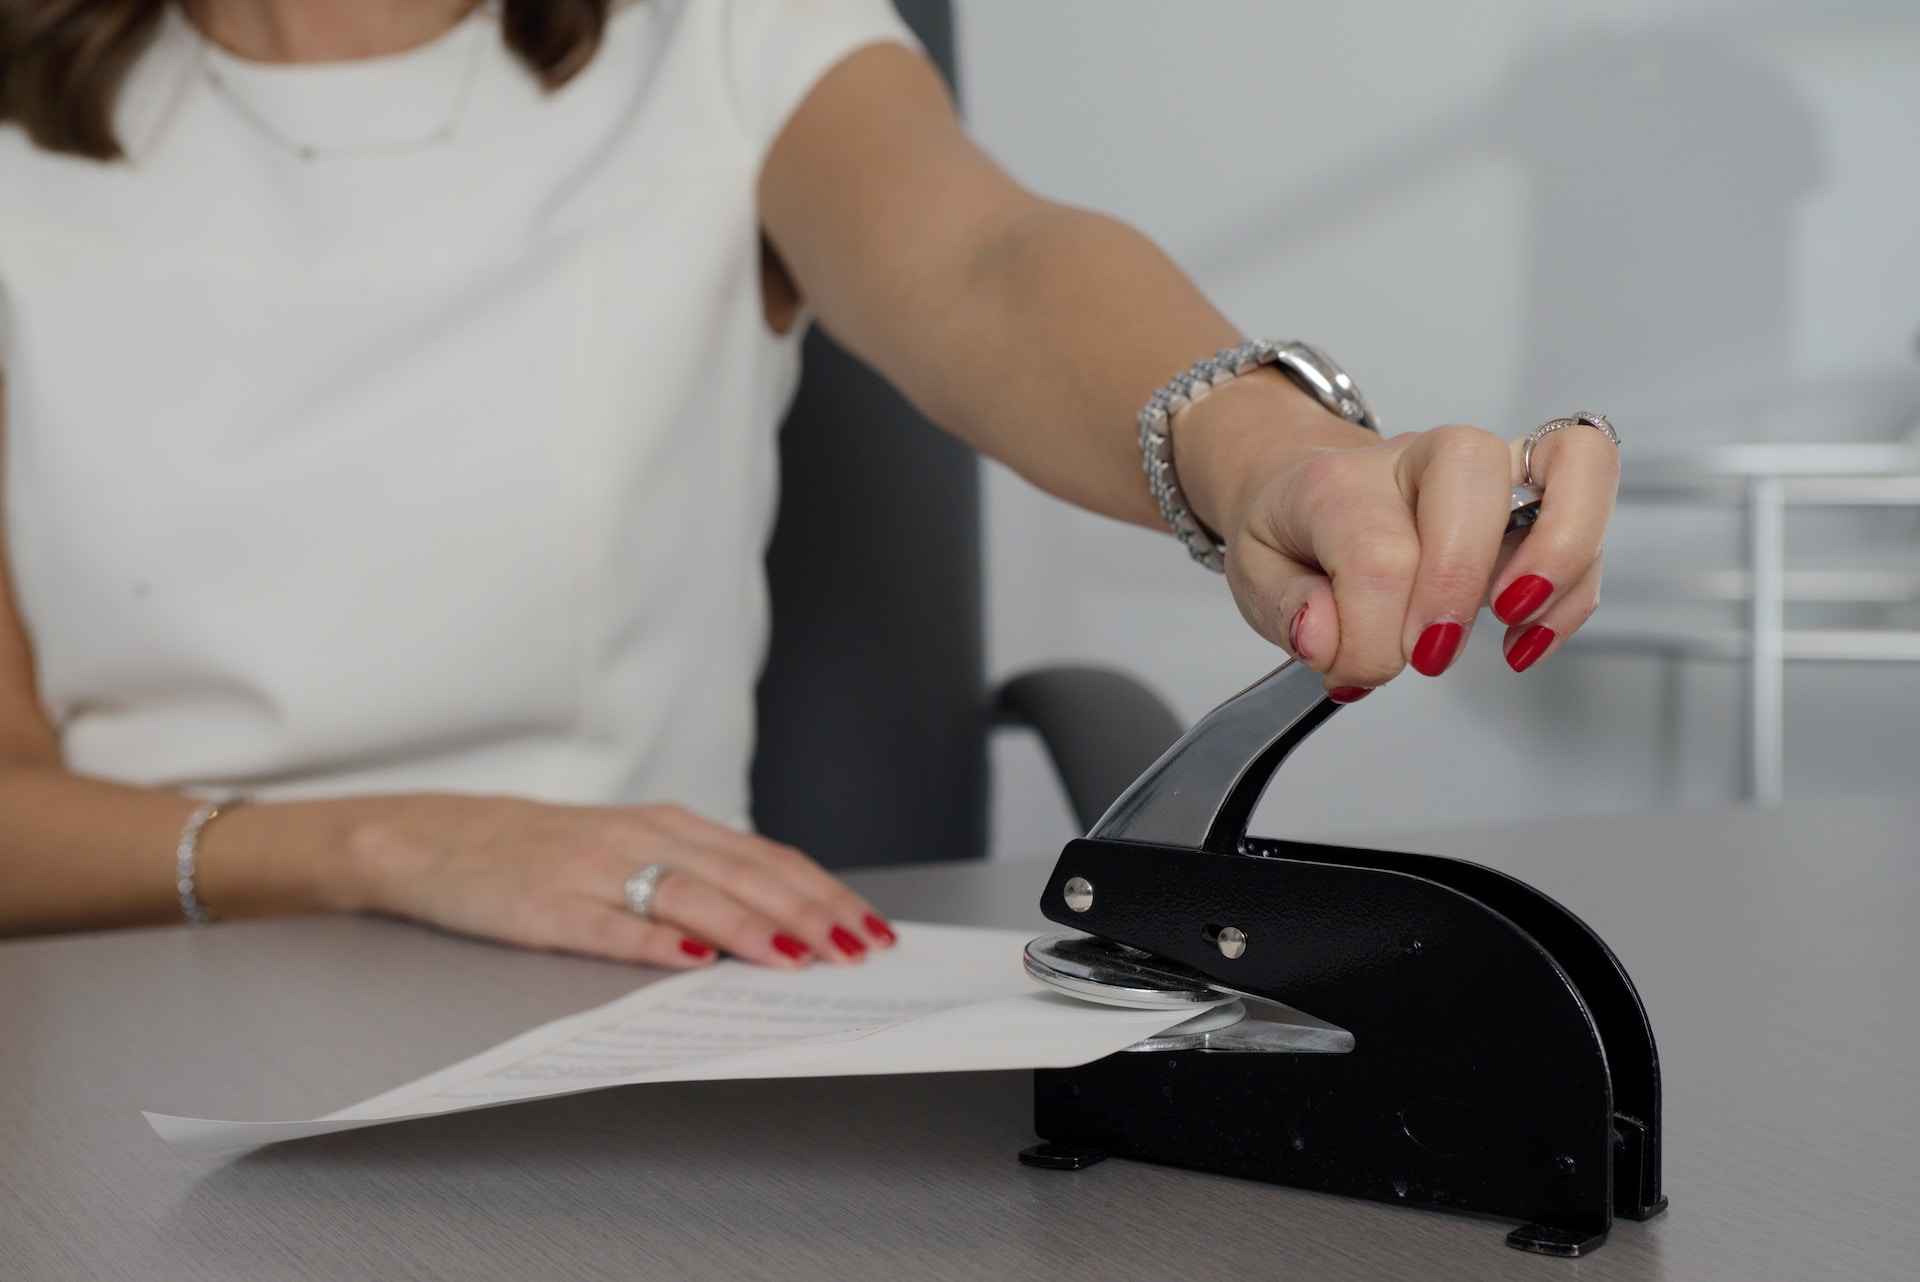 Proven Ways to Become a Notary